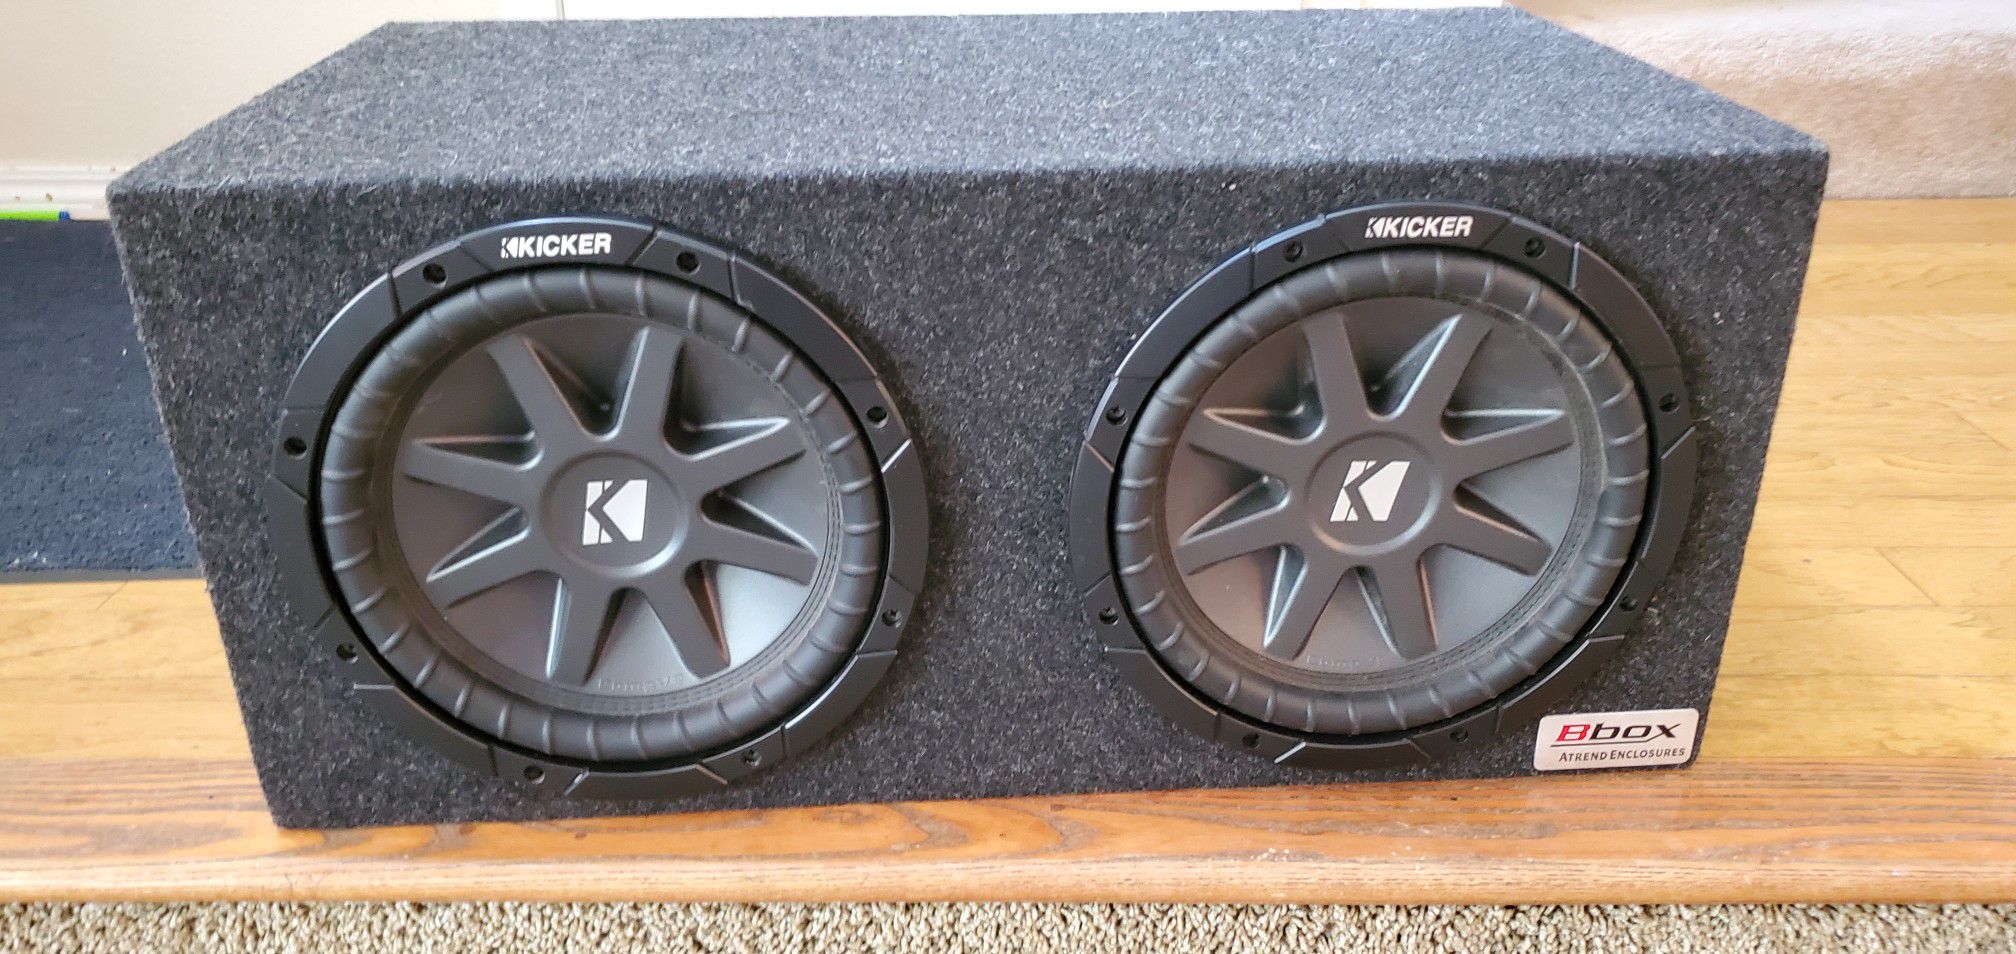 Kicker Subwoofer with box